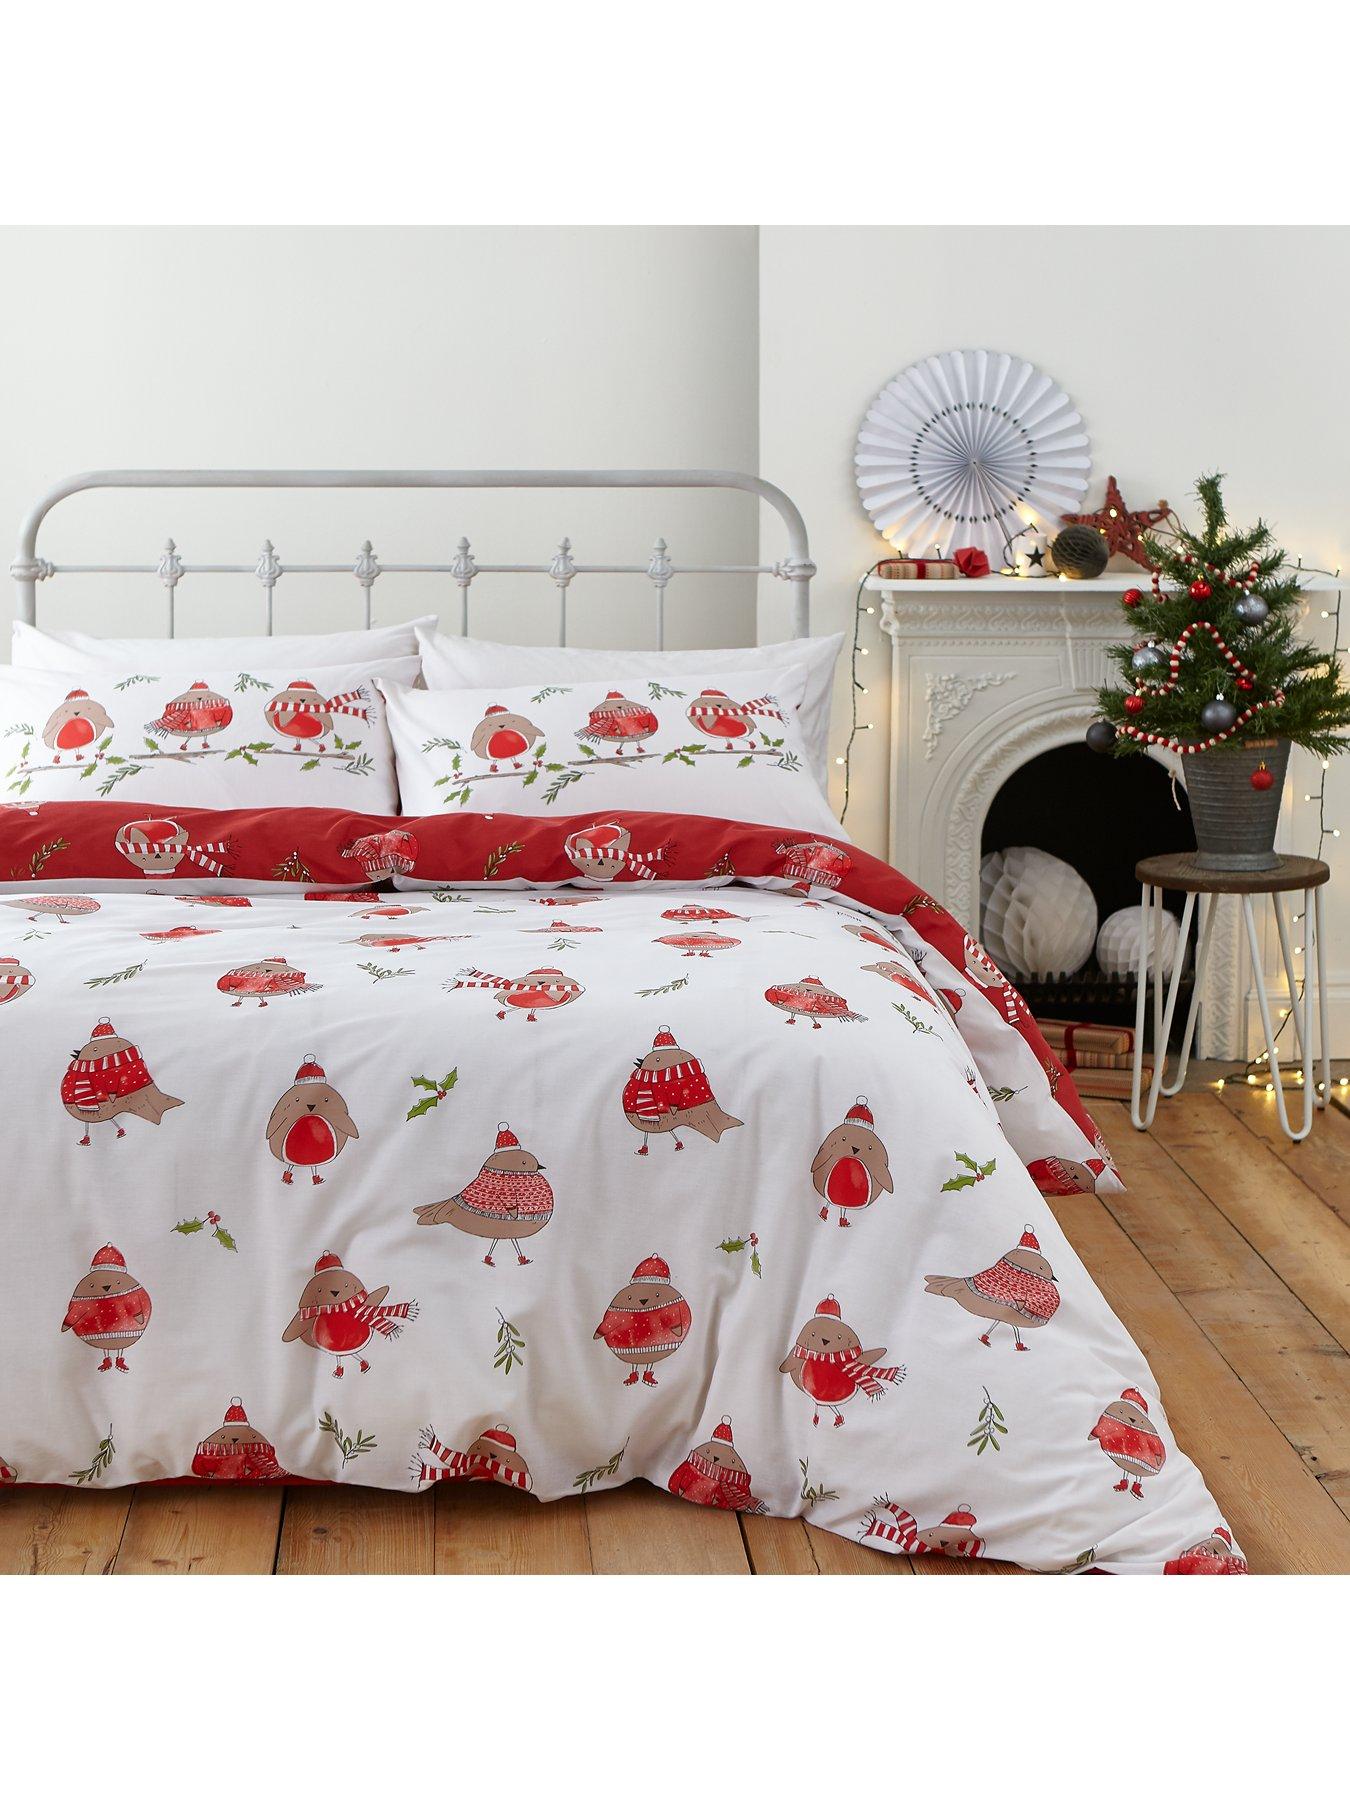 Catherine Lansfield Robins King Size Duvet Cover And Pillowcase